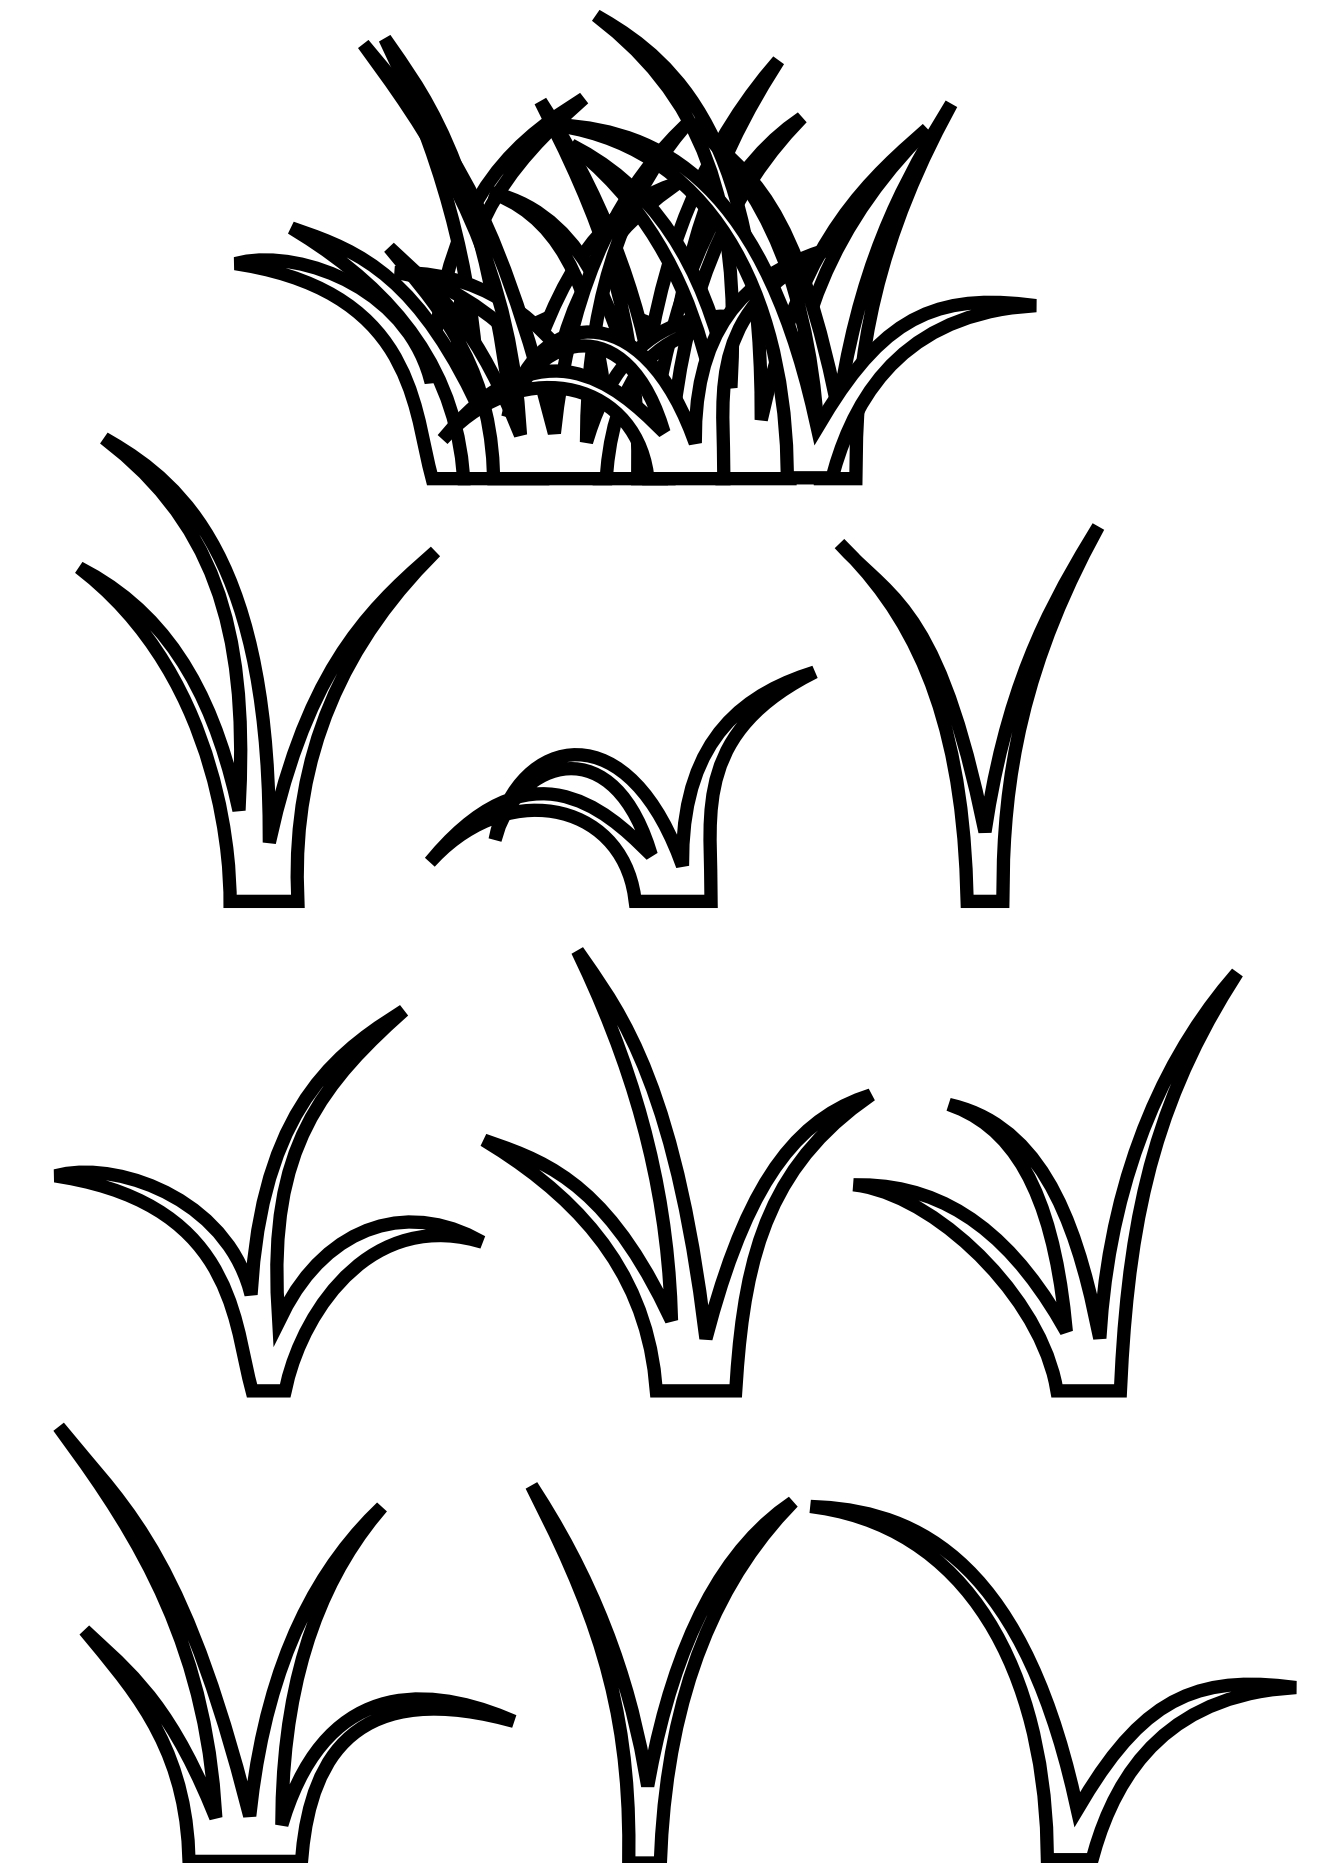  collection of black. Grass clipart circle